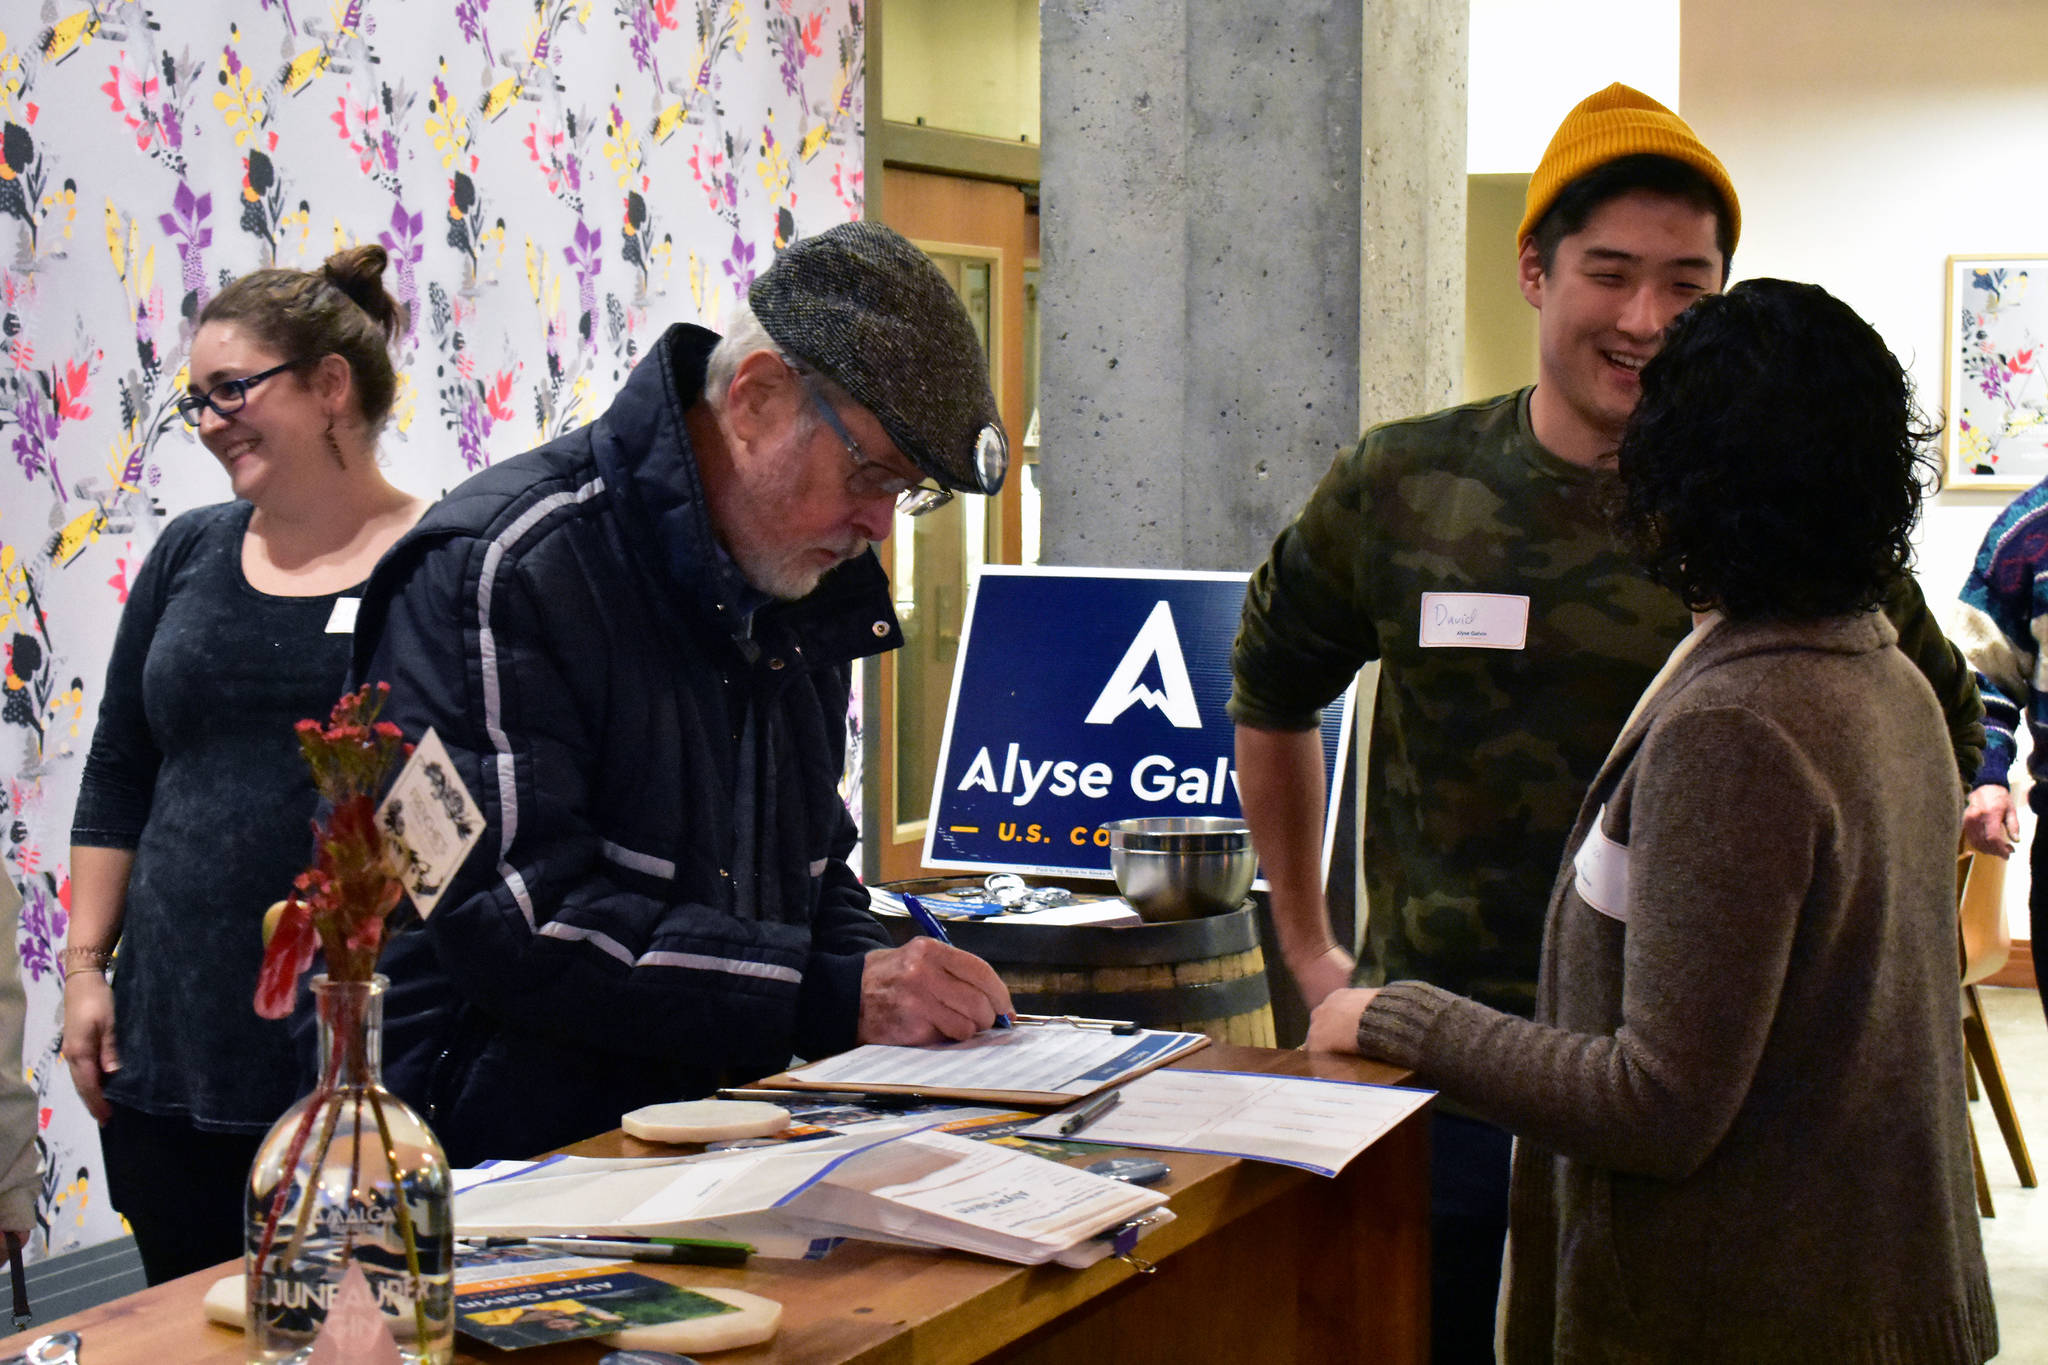 Supporters of Alyse Galvin, an Independent challenger to Rep. Don Young, R-Alaska, sign up for a mailing list at a campaign fundraiser at Amalga Distillery on Saturday, Nov. 23, 2019. (Peter Segall | Juneau Empire)